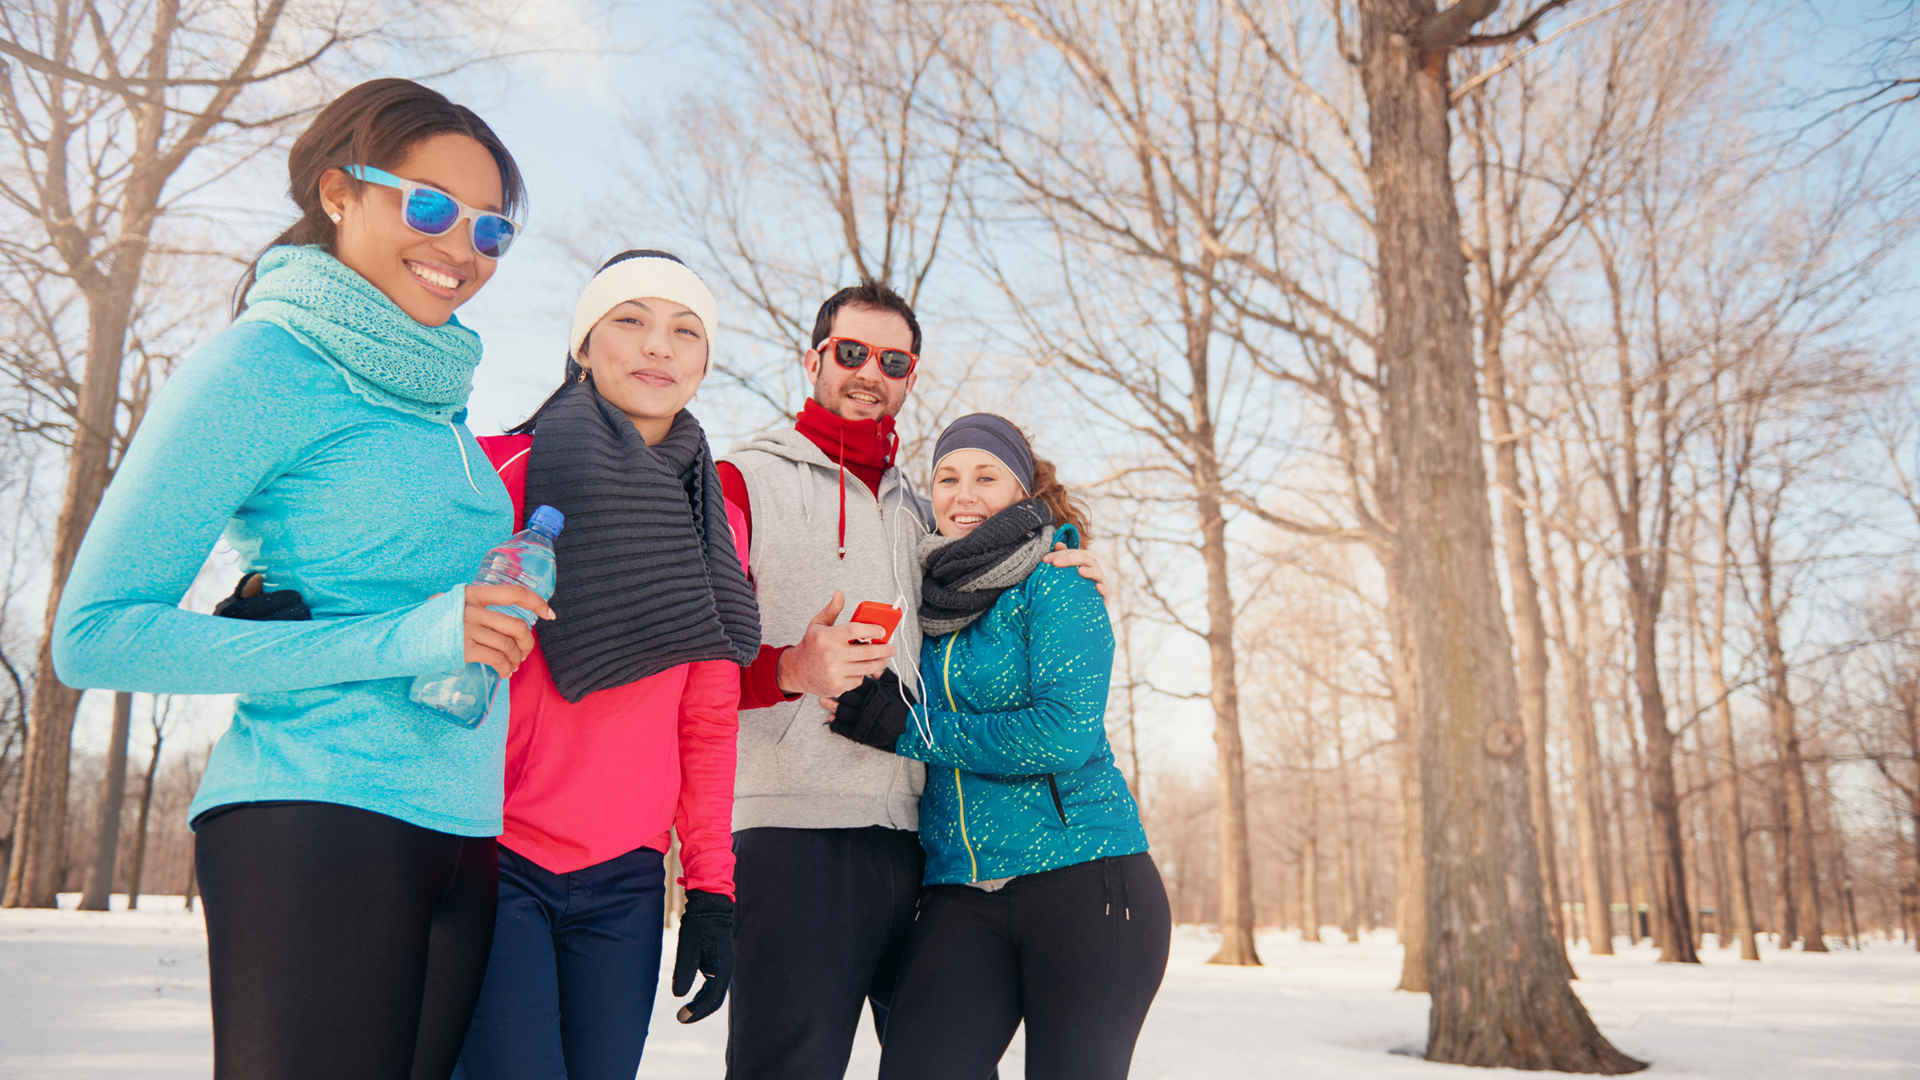 A group of friends smiling outside wearing winter running gear